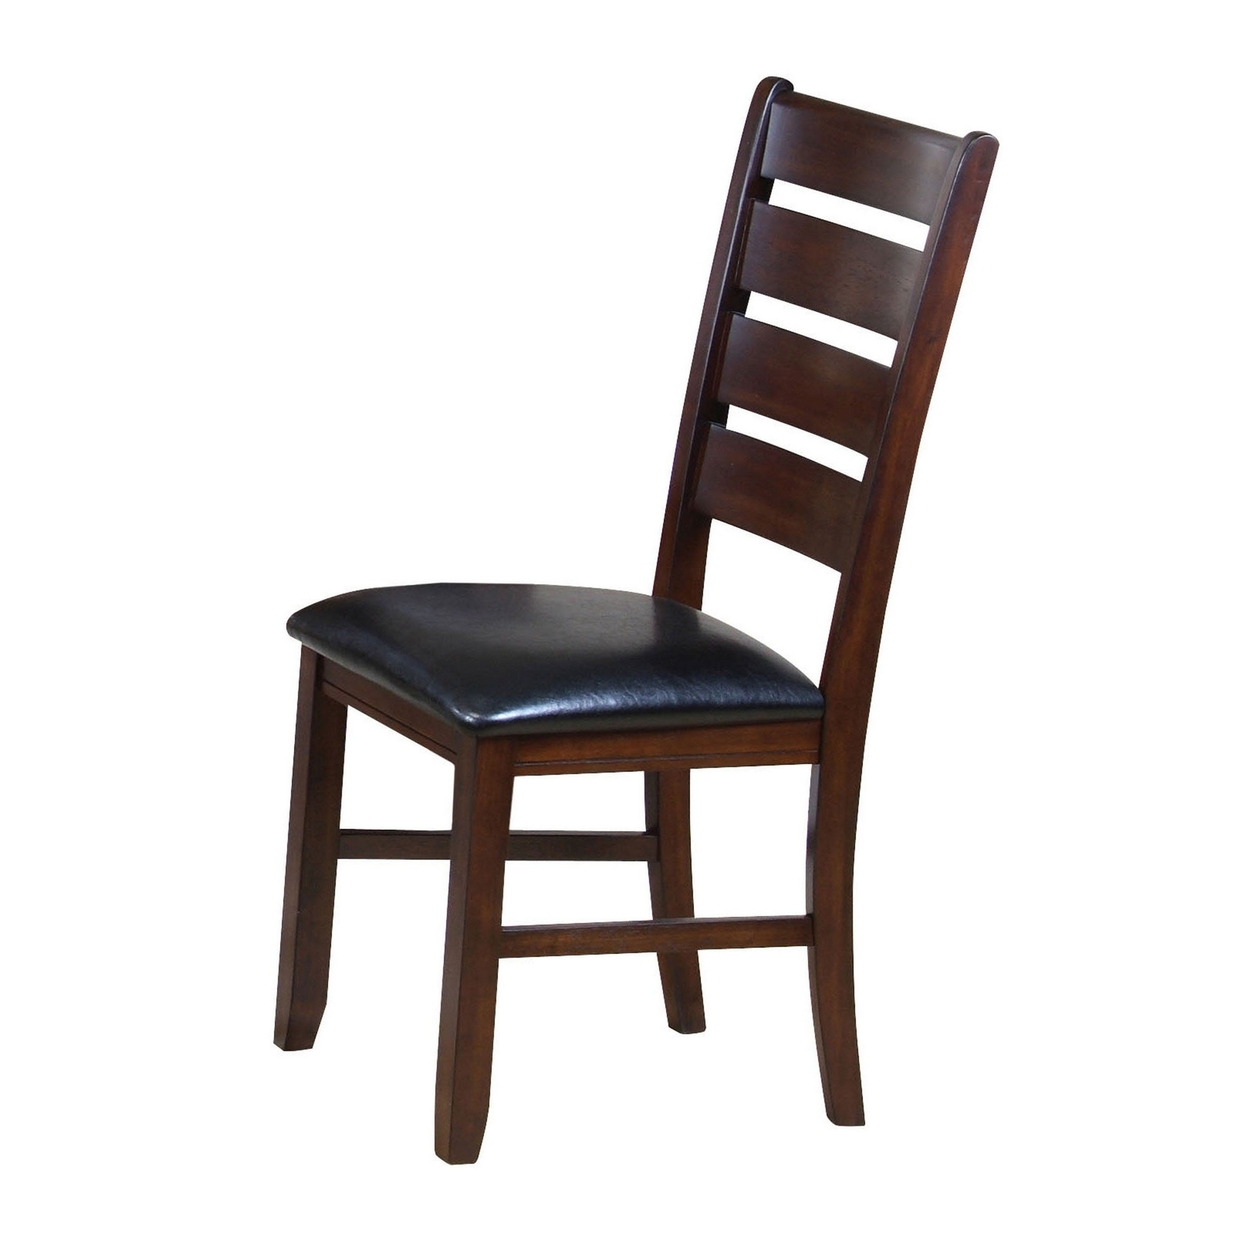 Leather Upholstered Wooden Side Chairs With Ladder Back, Brown & Black, (Set Of 2)- Saltoro Sherpi